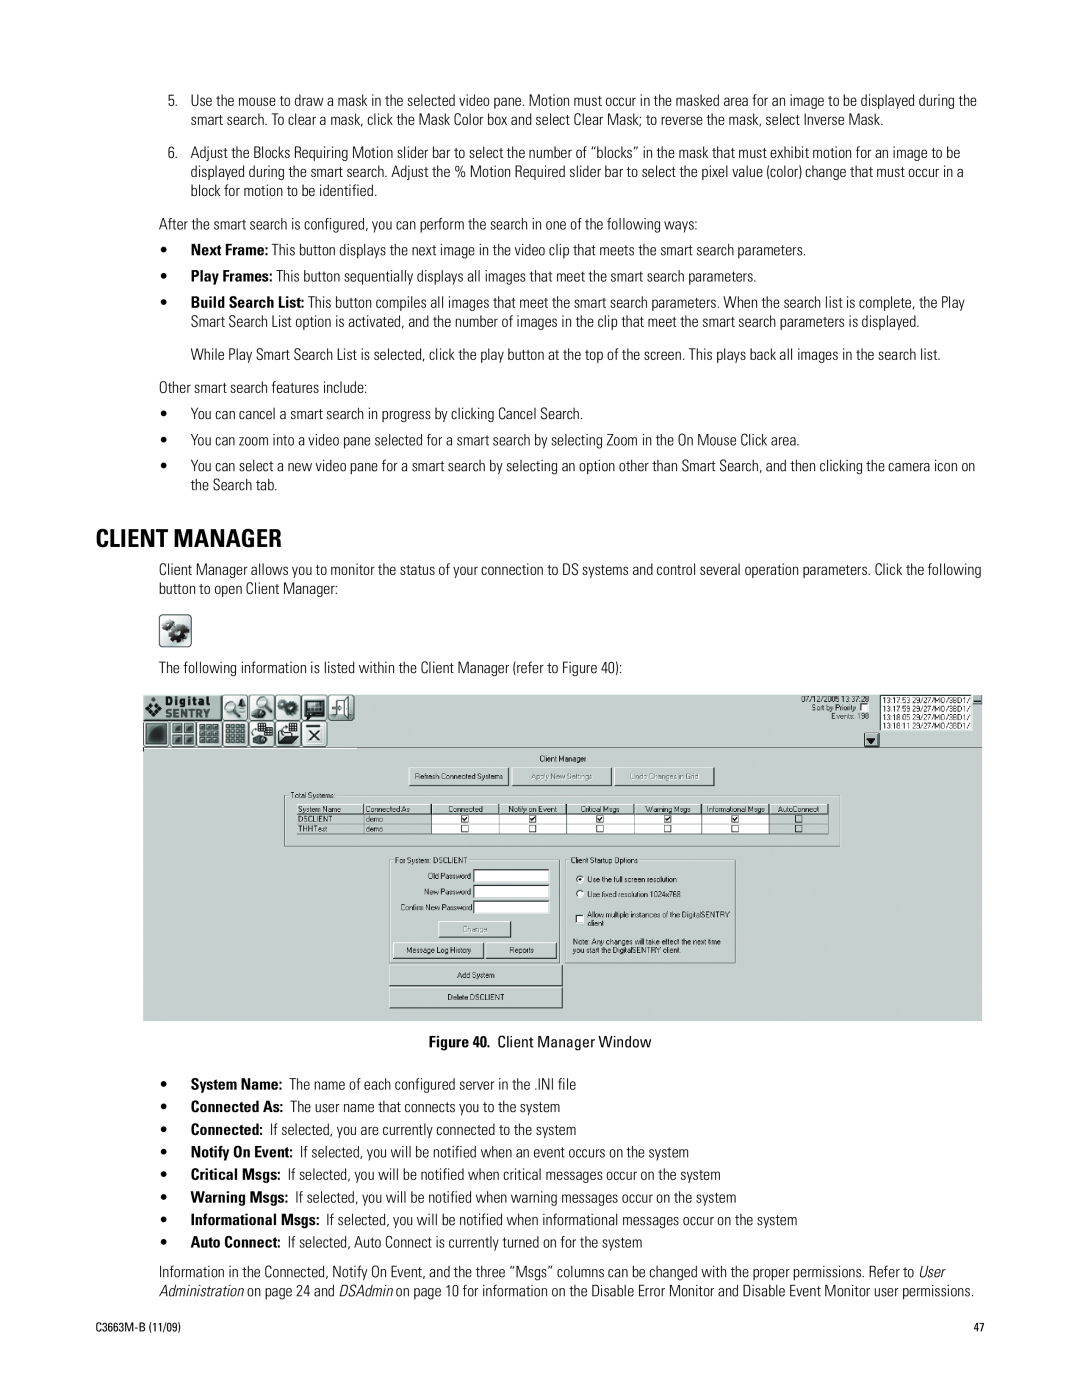 Pelco DS NVS manual Client Manager 